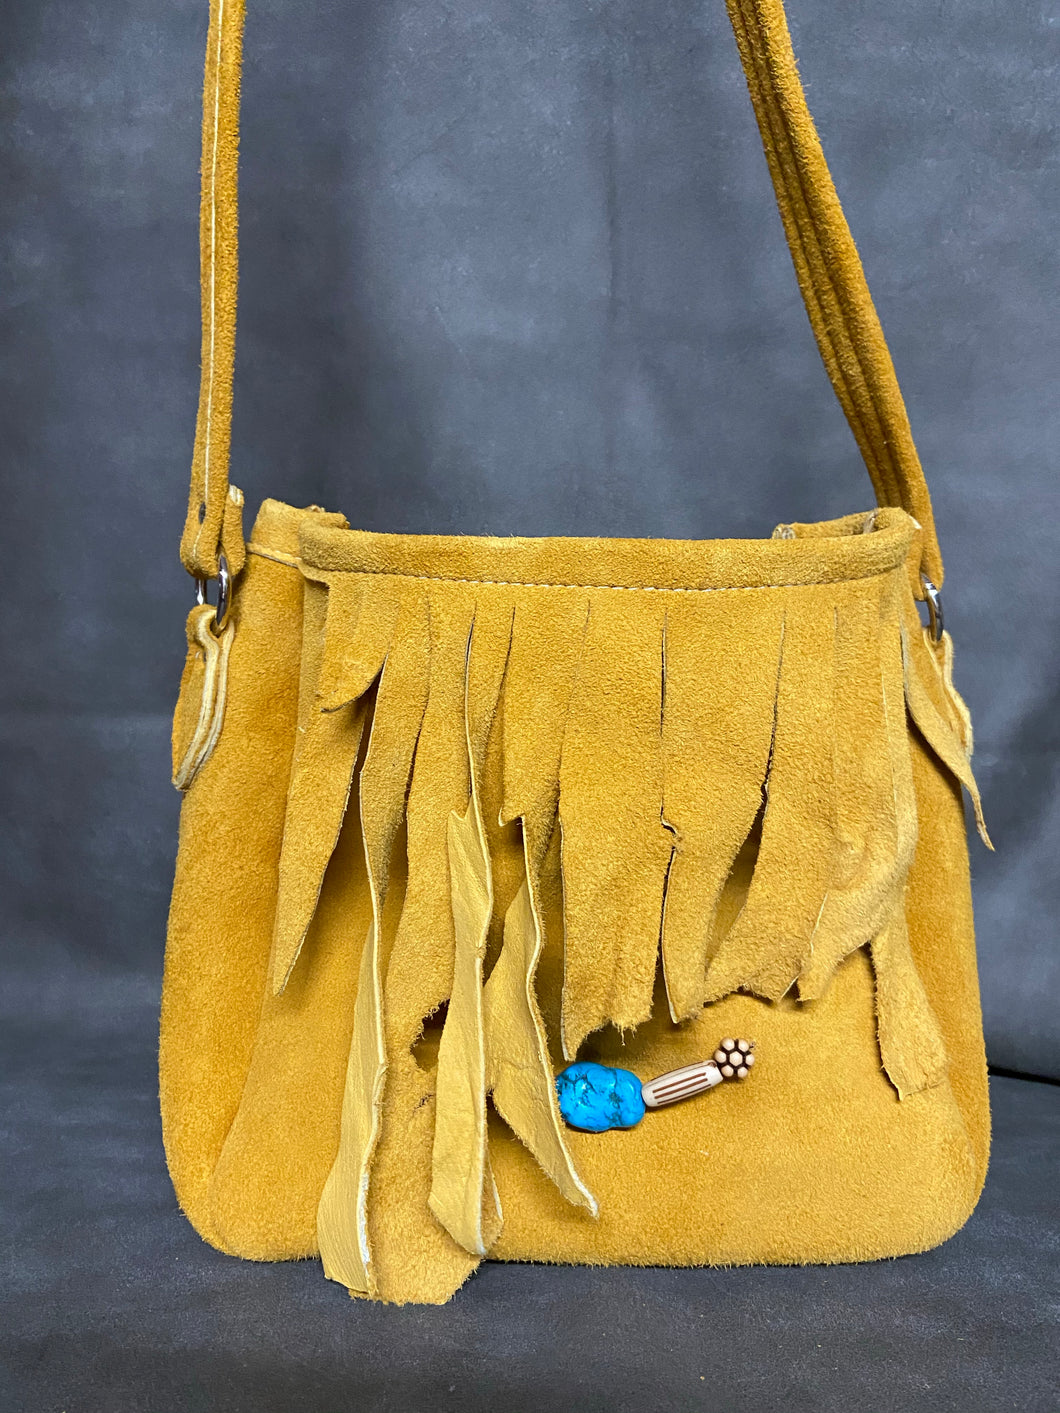 Elk Skin Purse with Turquoise Accents